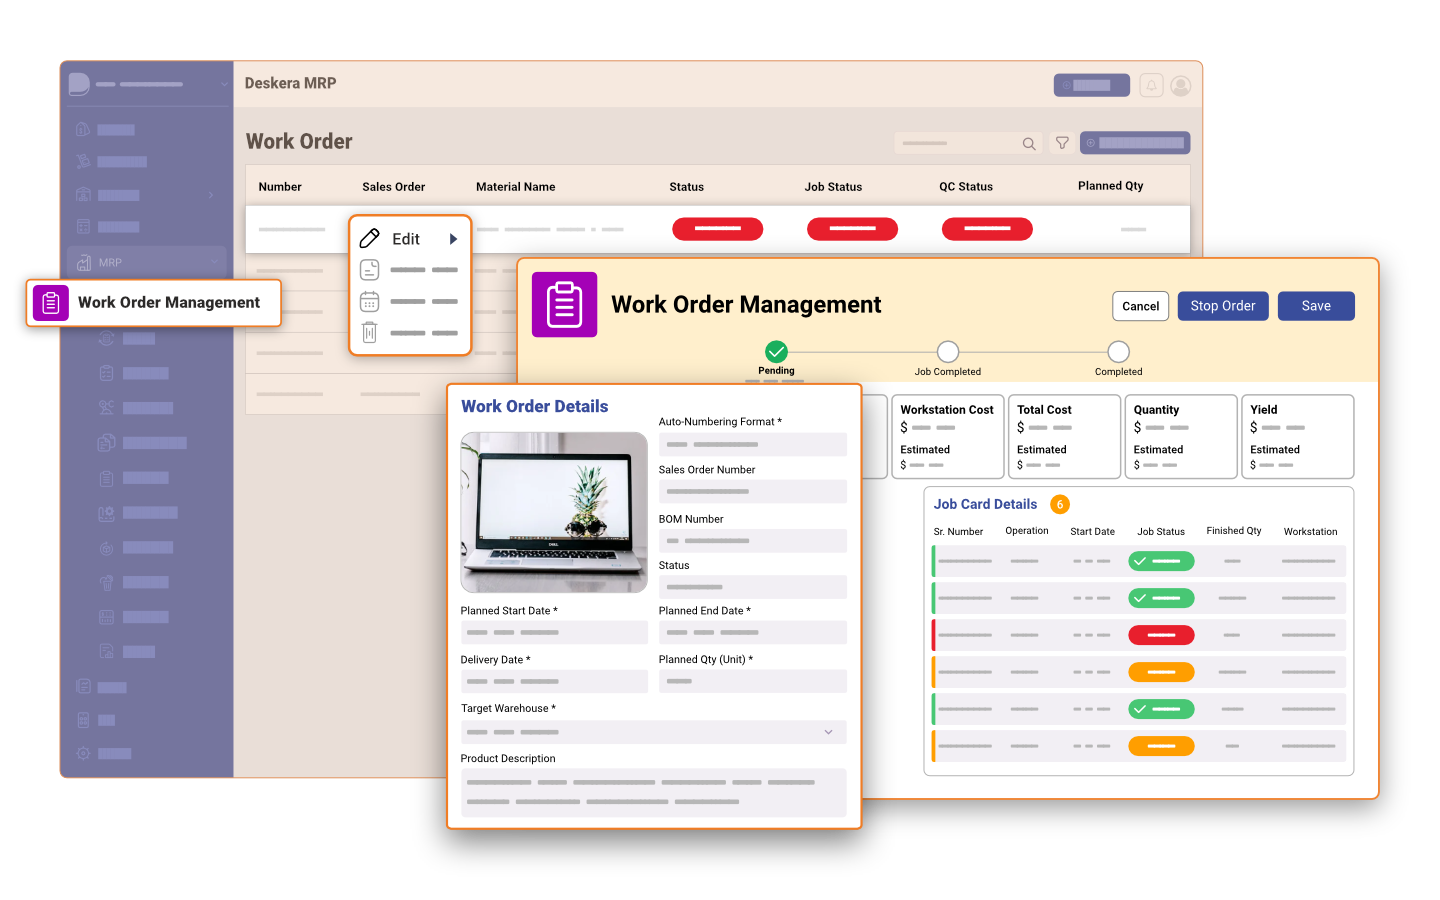 Automate work order task creation and assignment, track progress, and monitor completion with real-time updates. Monitor resources, costs and time associated with each work order for improved accuracy and efficiency.